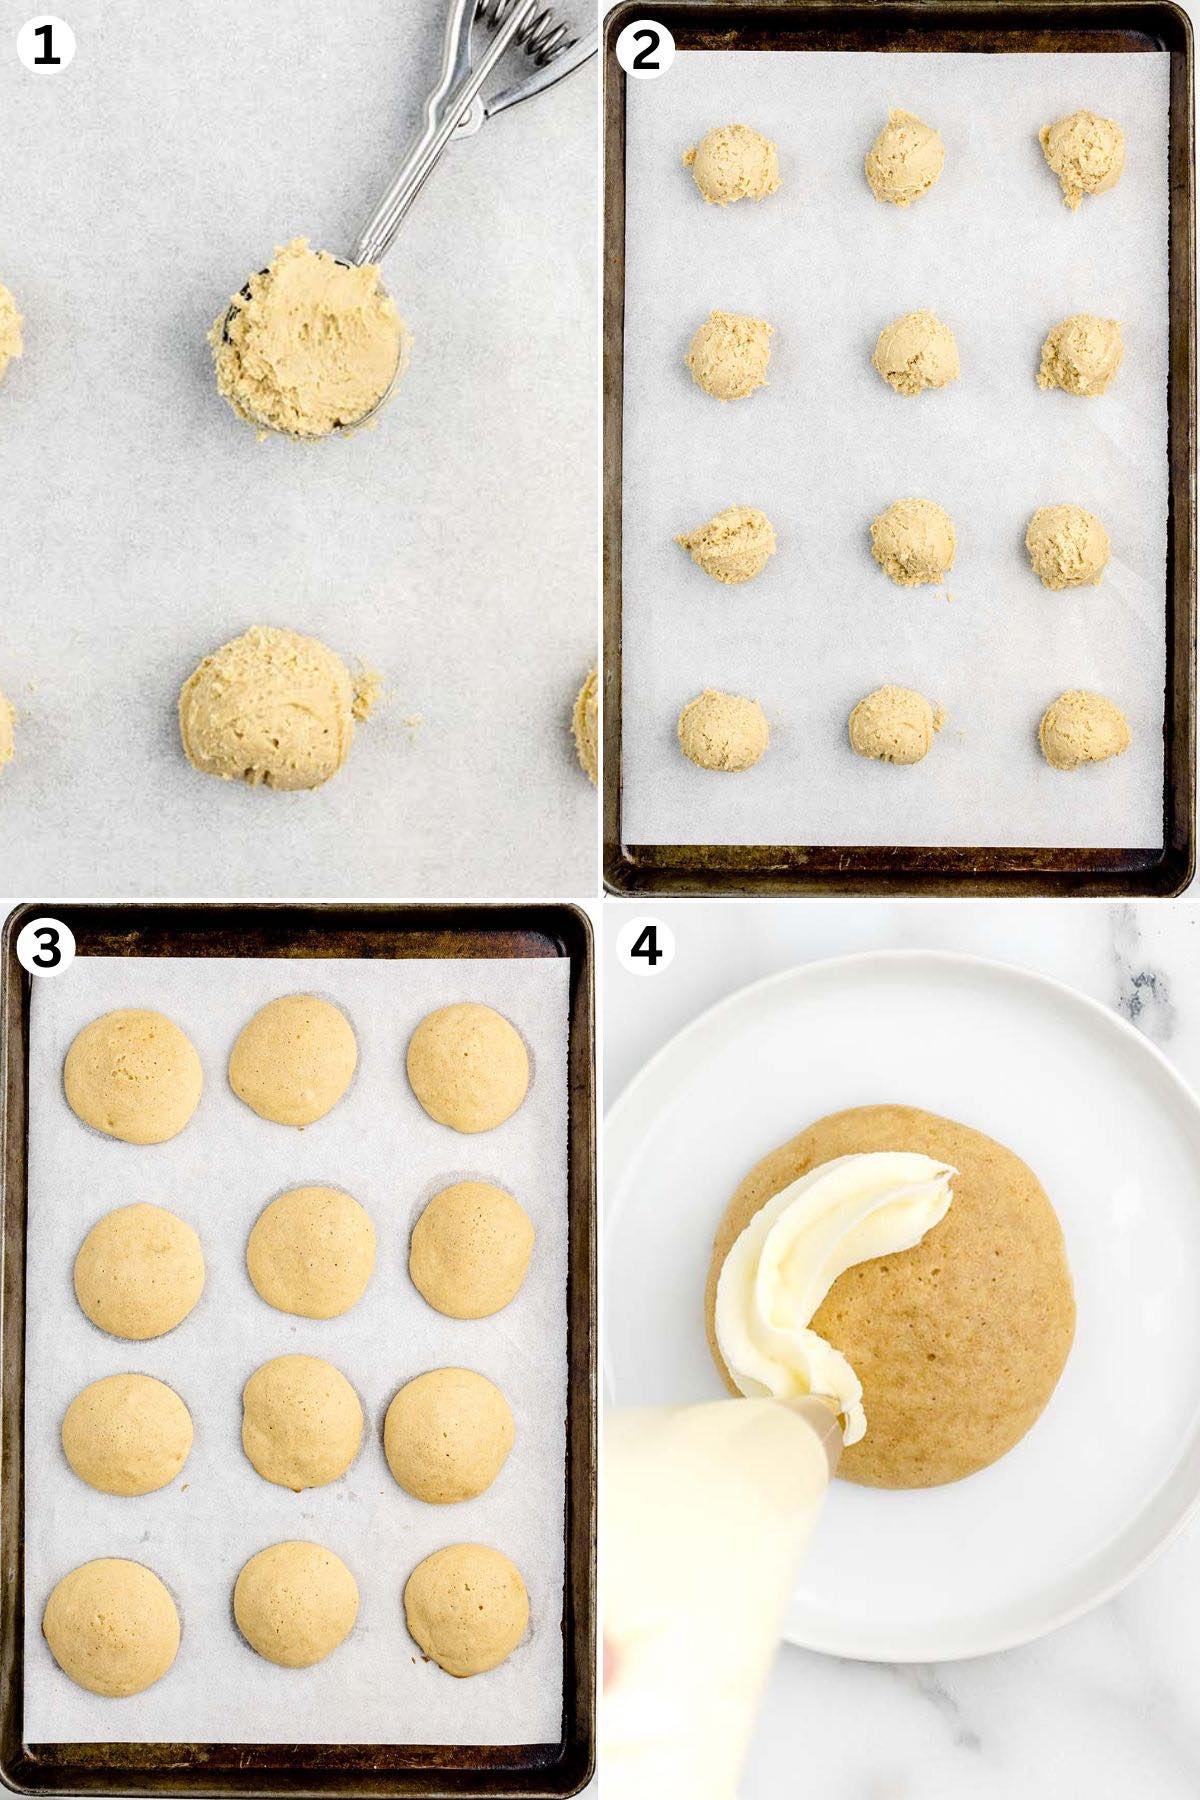 scooped cookie dough with ice cream scoop and line up on baking sheet. baked cookies on baking sheet. adding frosting on top of cookies.